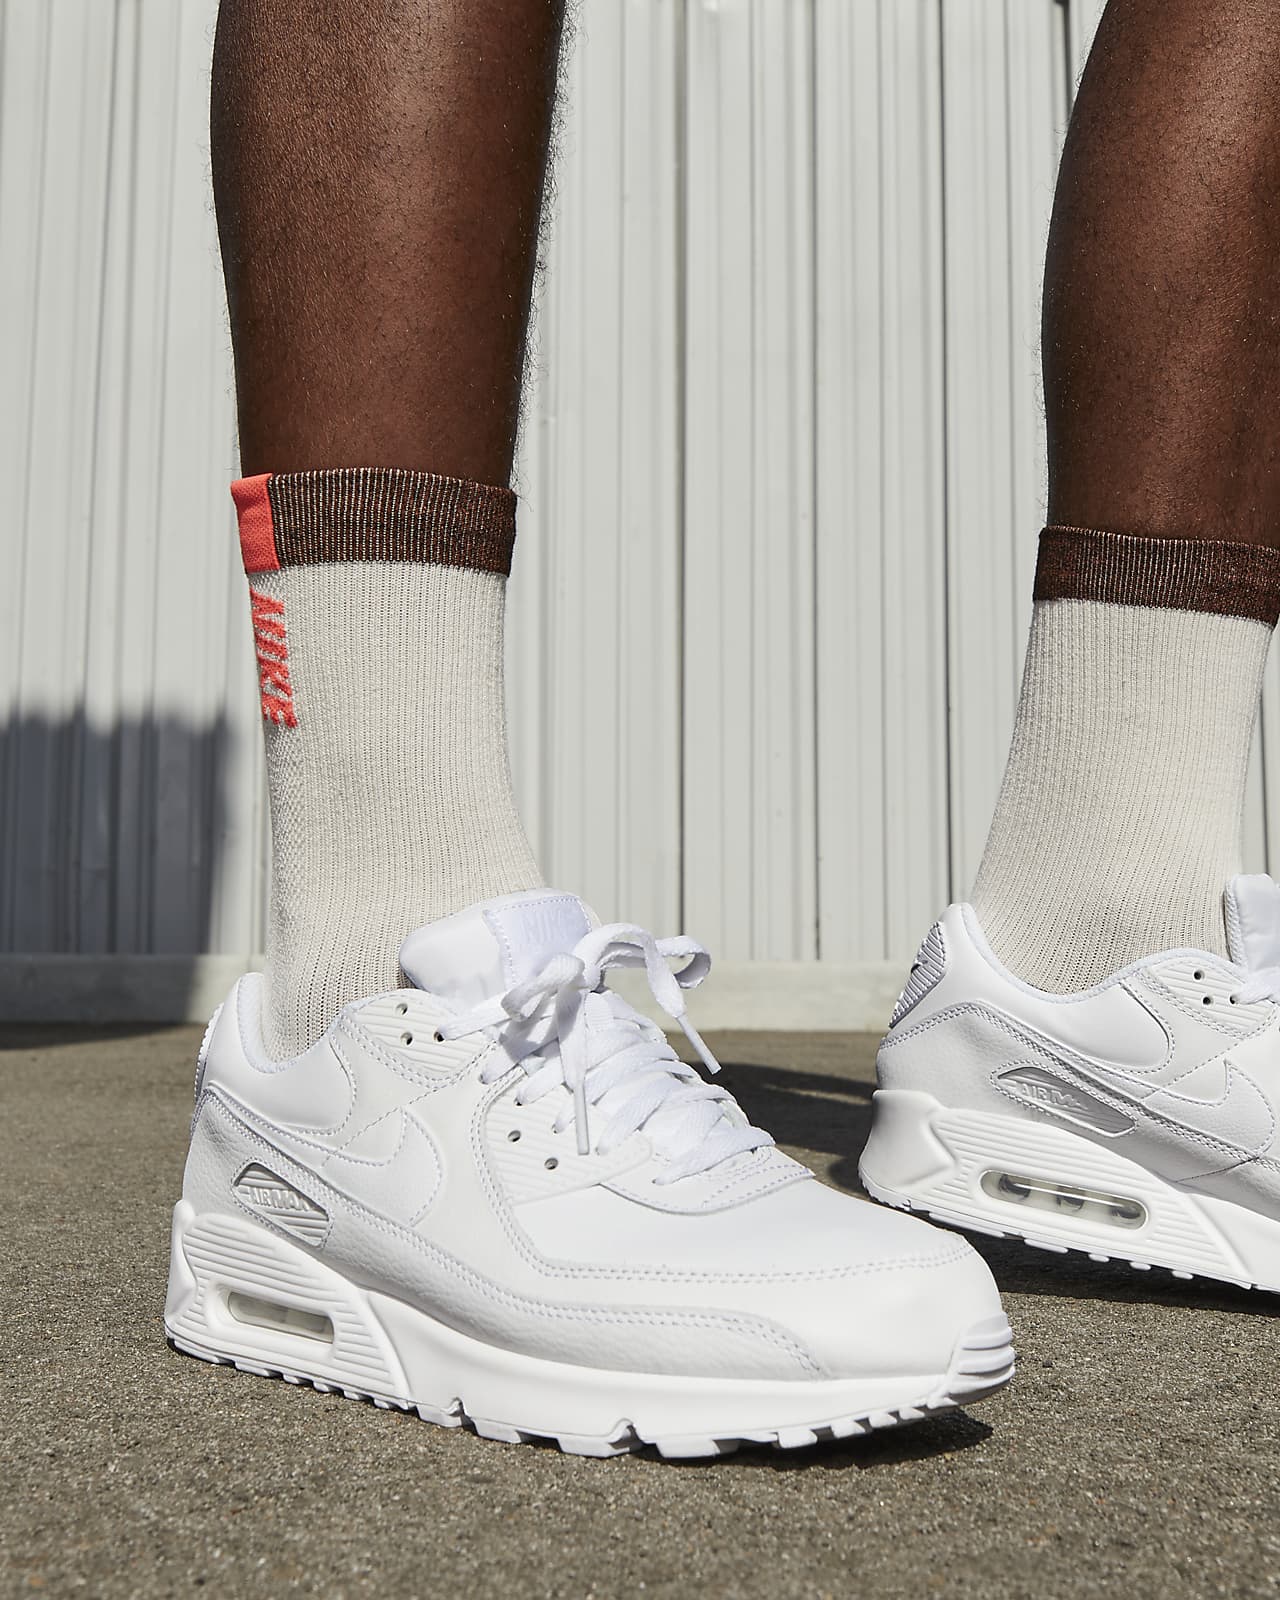 men's air max 90 white leather